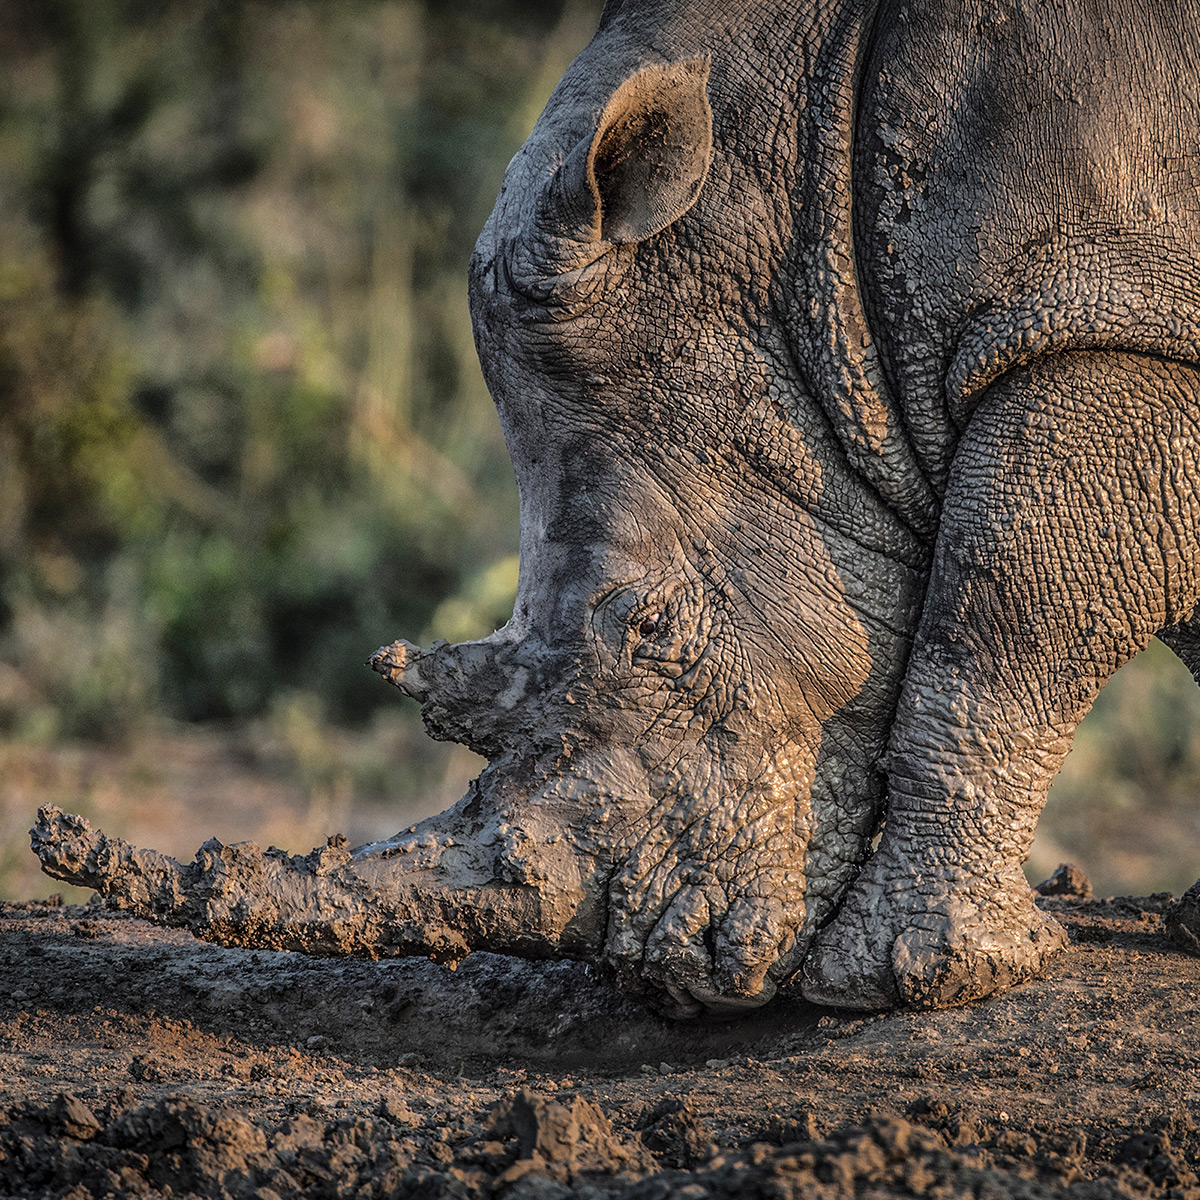 A muddy rhino in a reserve in South Africa © Kevin Dooley